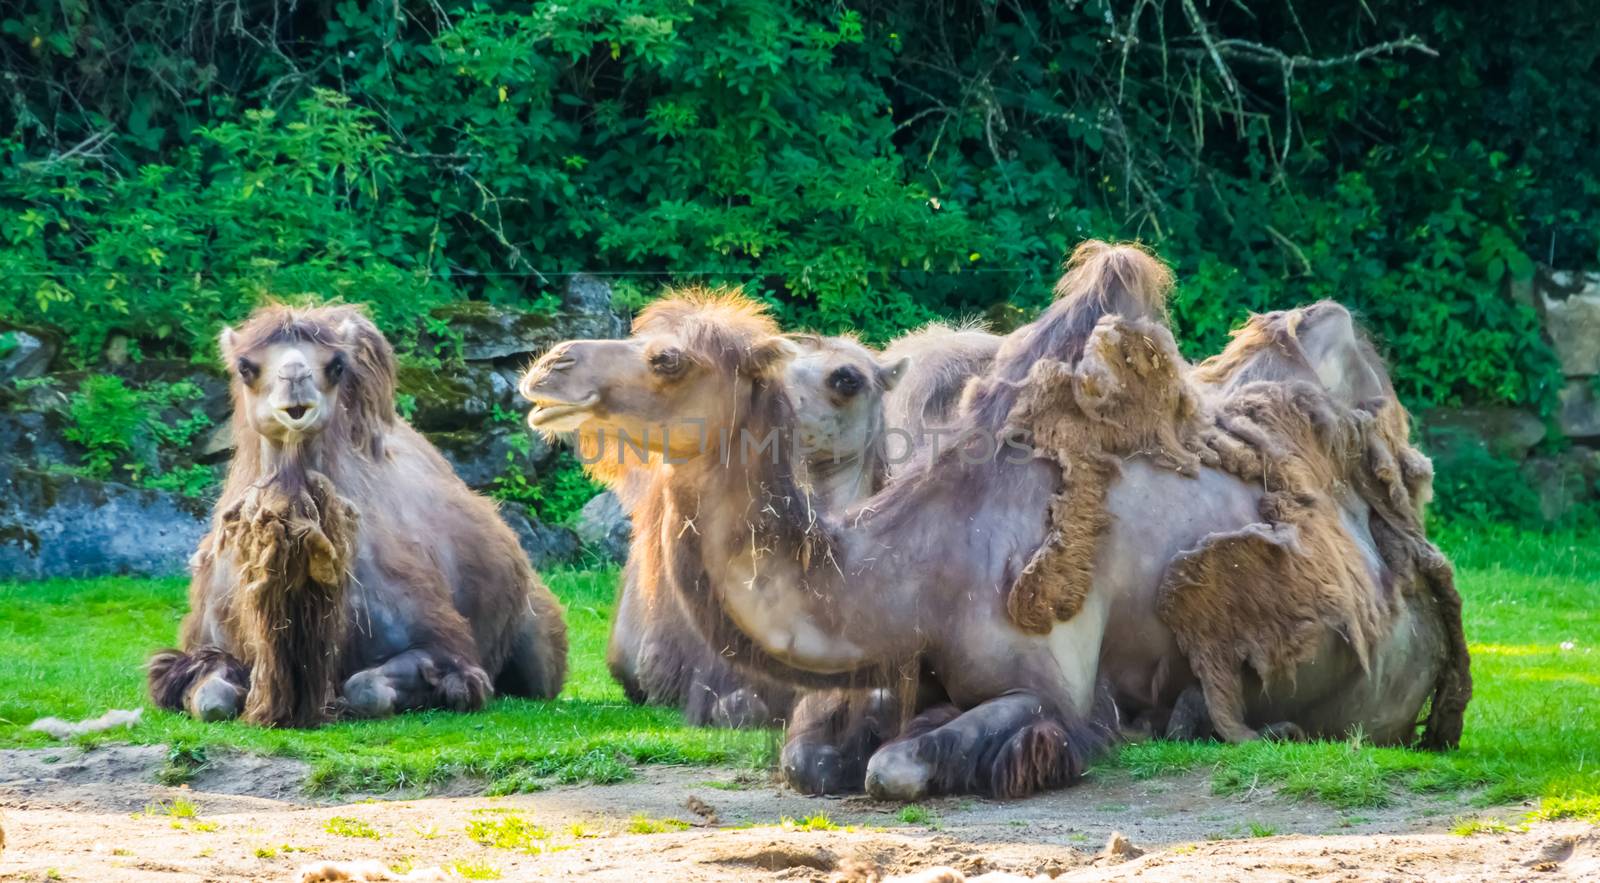 closeup of a group of camels with bad fur balding, popular zoo animals by charlottebleijenberg